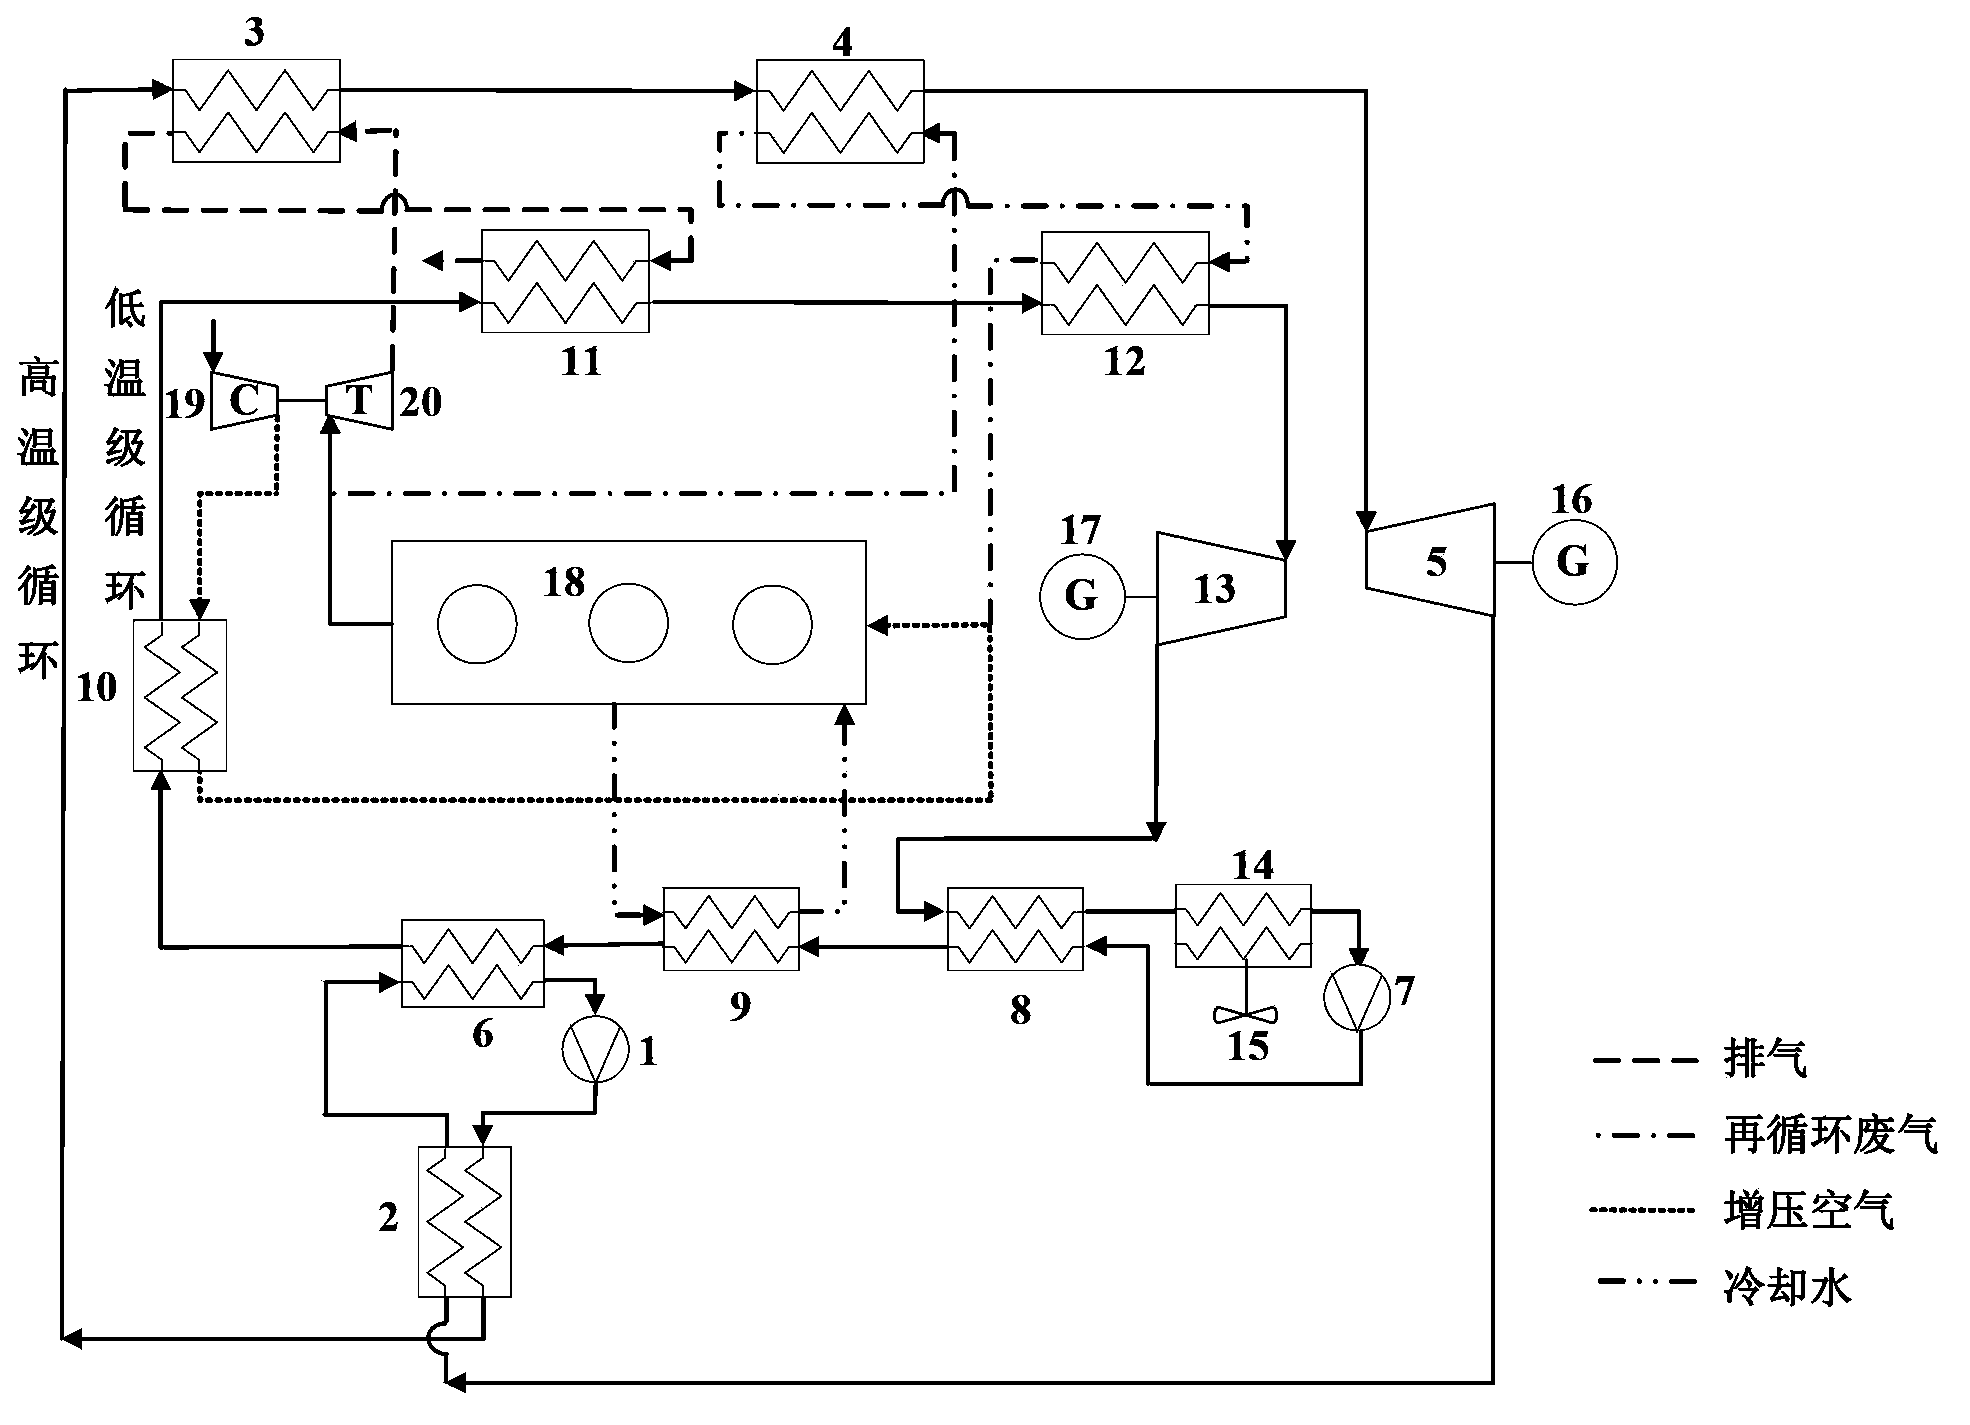 Combined cycle thermoelectric conversion system utilizing multi-grade waste heat of internal combustion engine